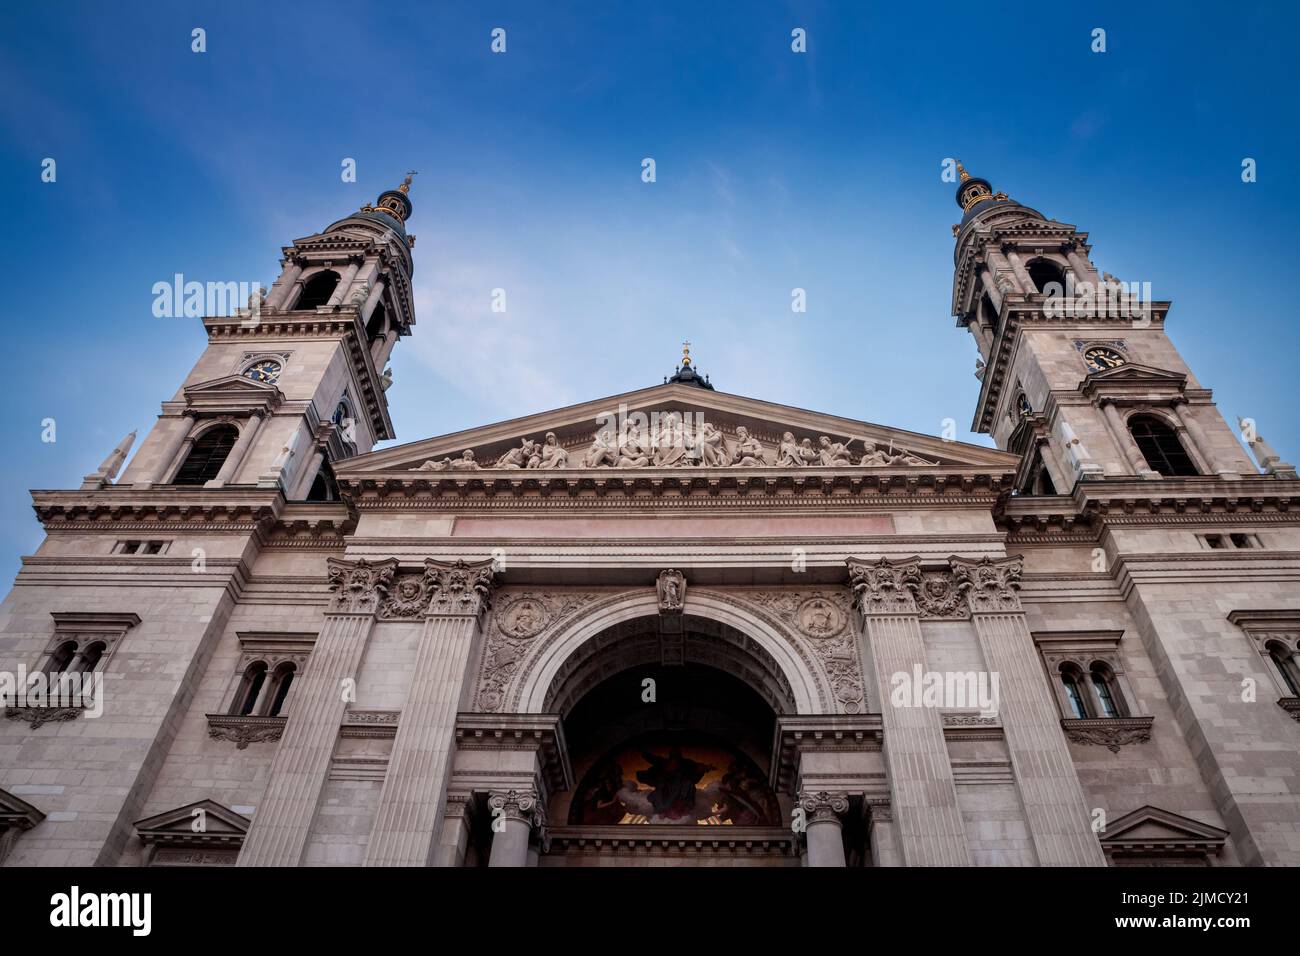 Picture of the main facade of the Szent Istvan basilica Church in the city center of Budapest, Hungary. St. Stephen's Basilica is a Roman Catholic bas Stock Photo